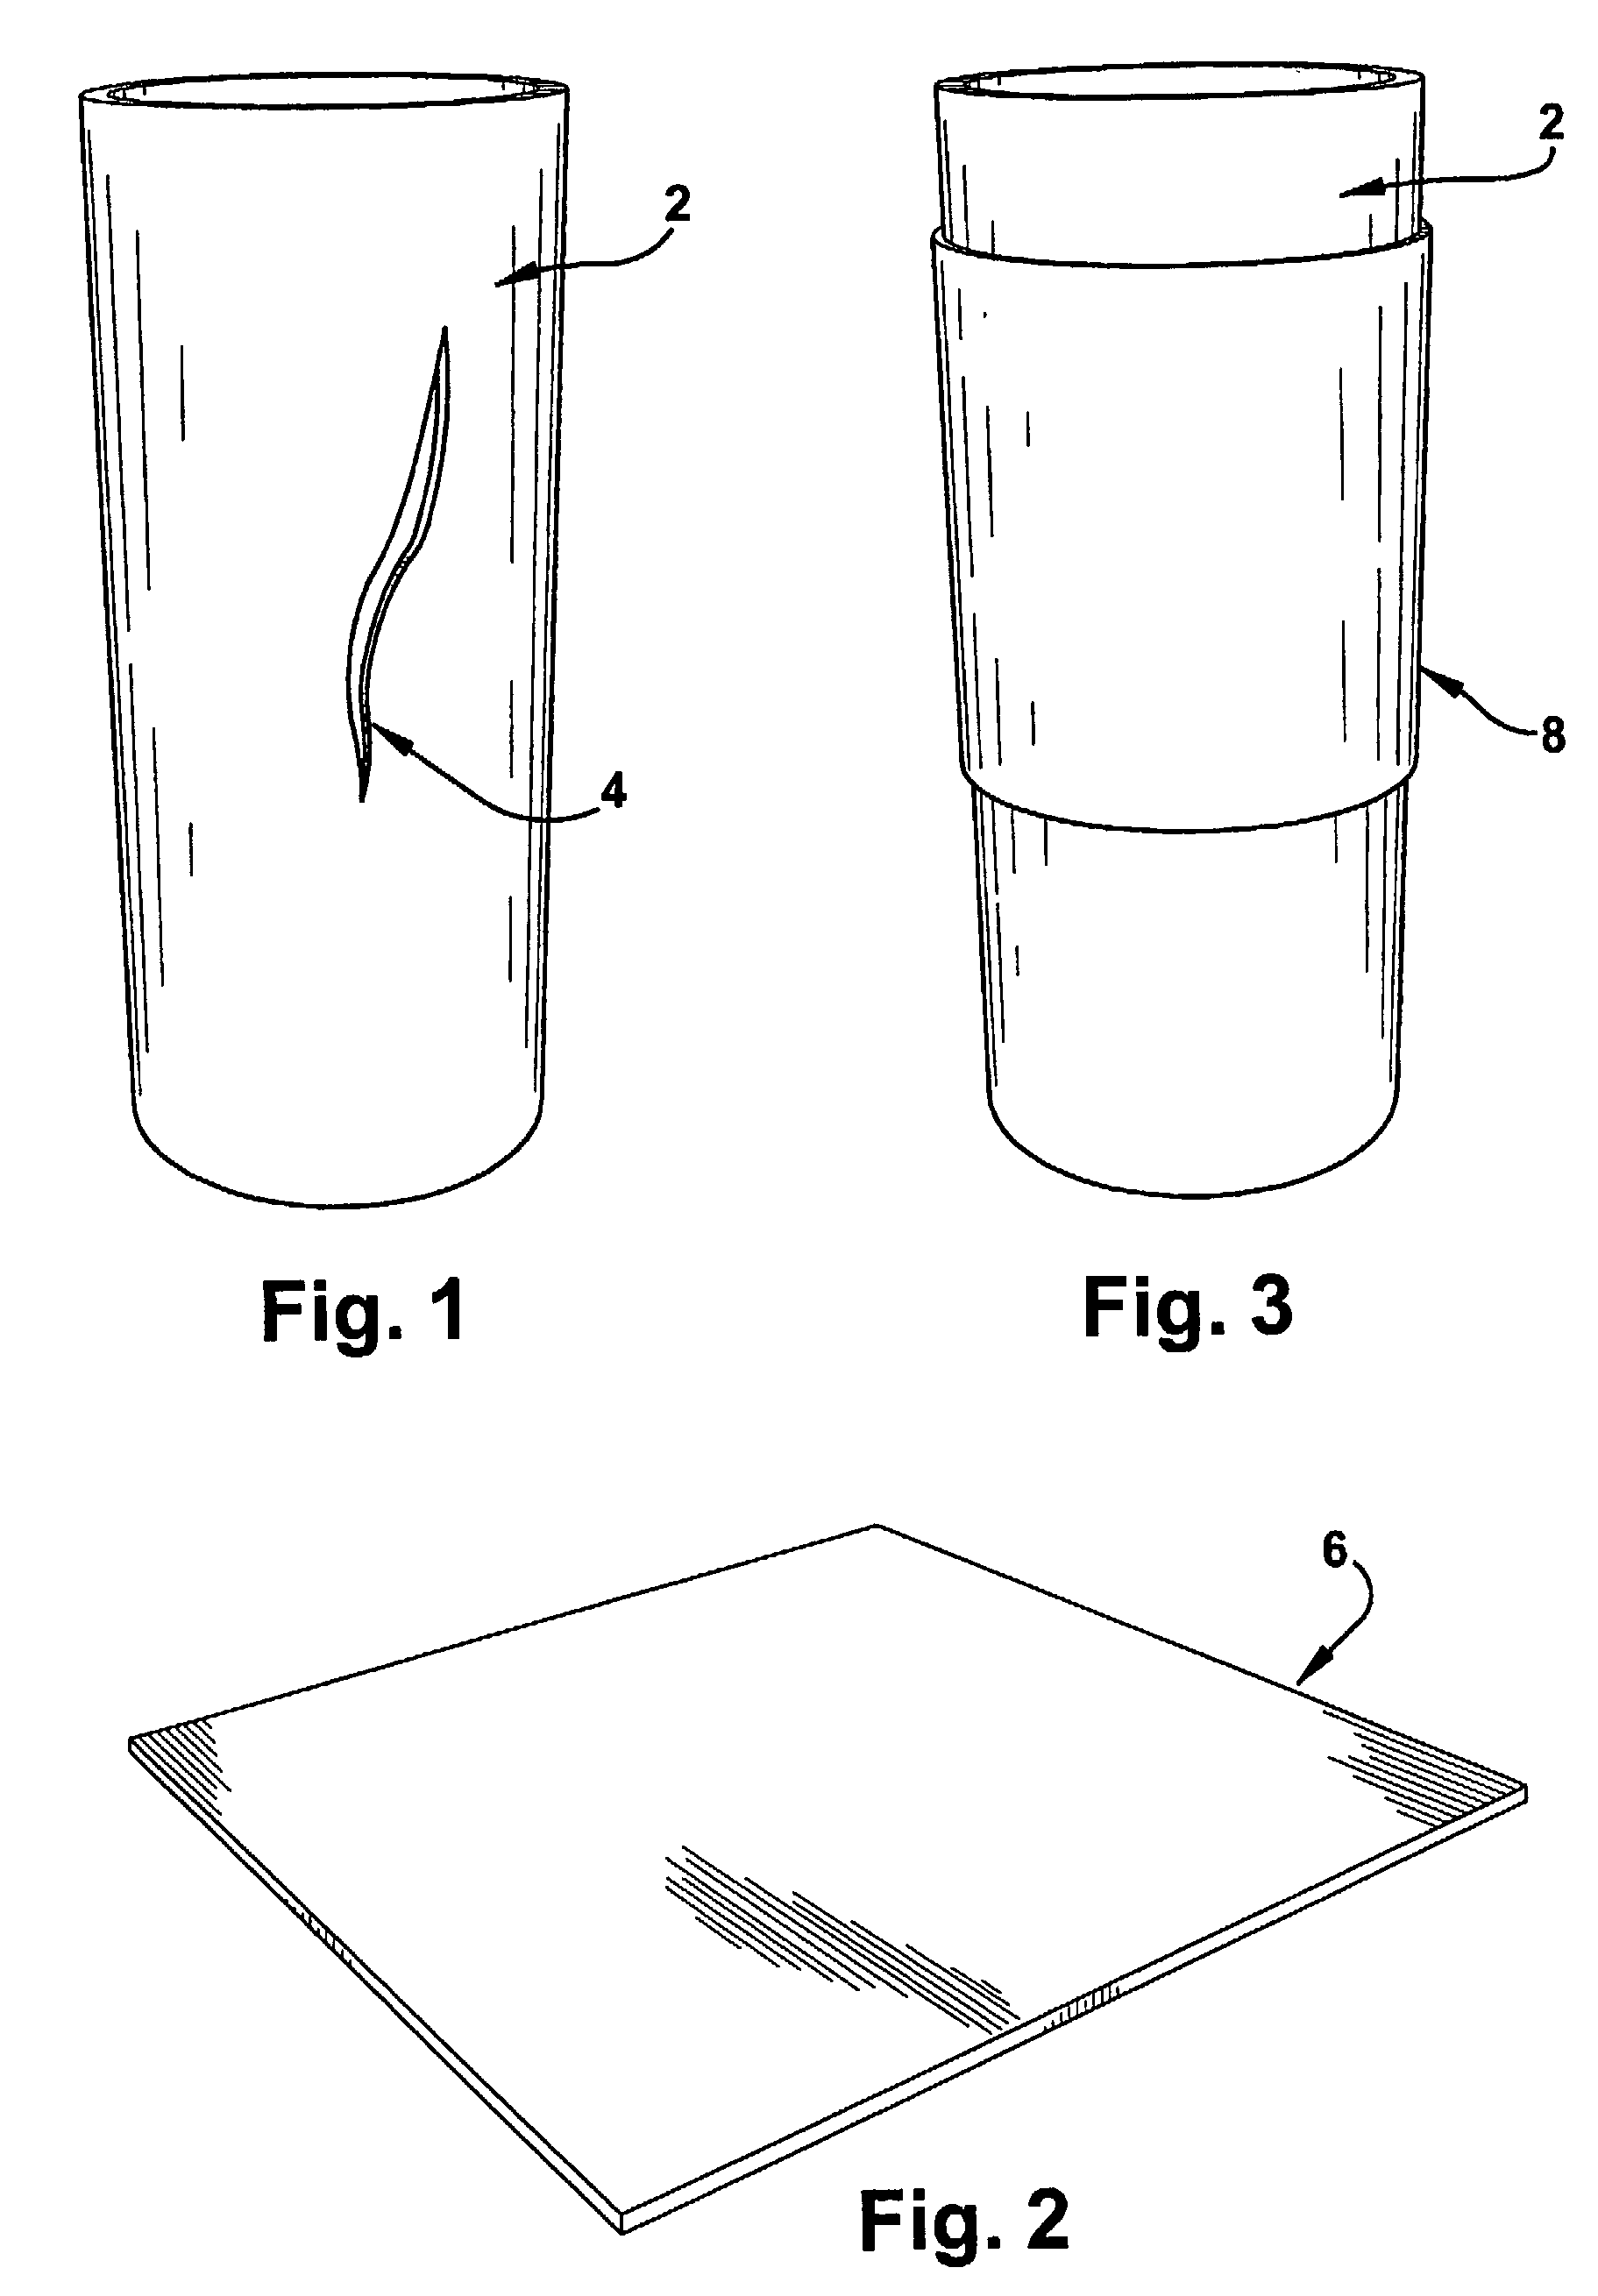 Method of Making and Using Shape Memory Polymer Composite Patches